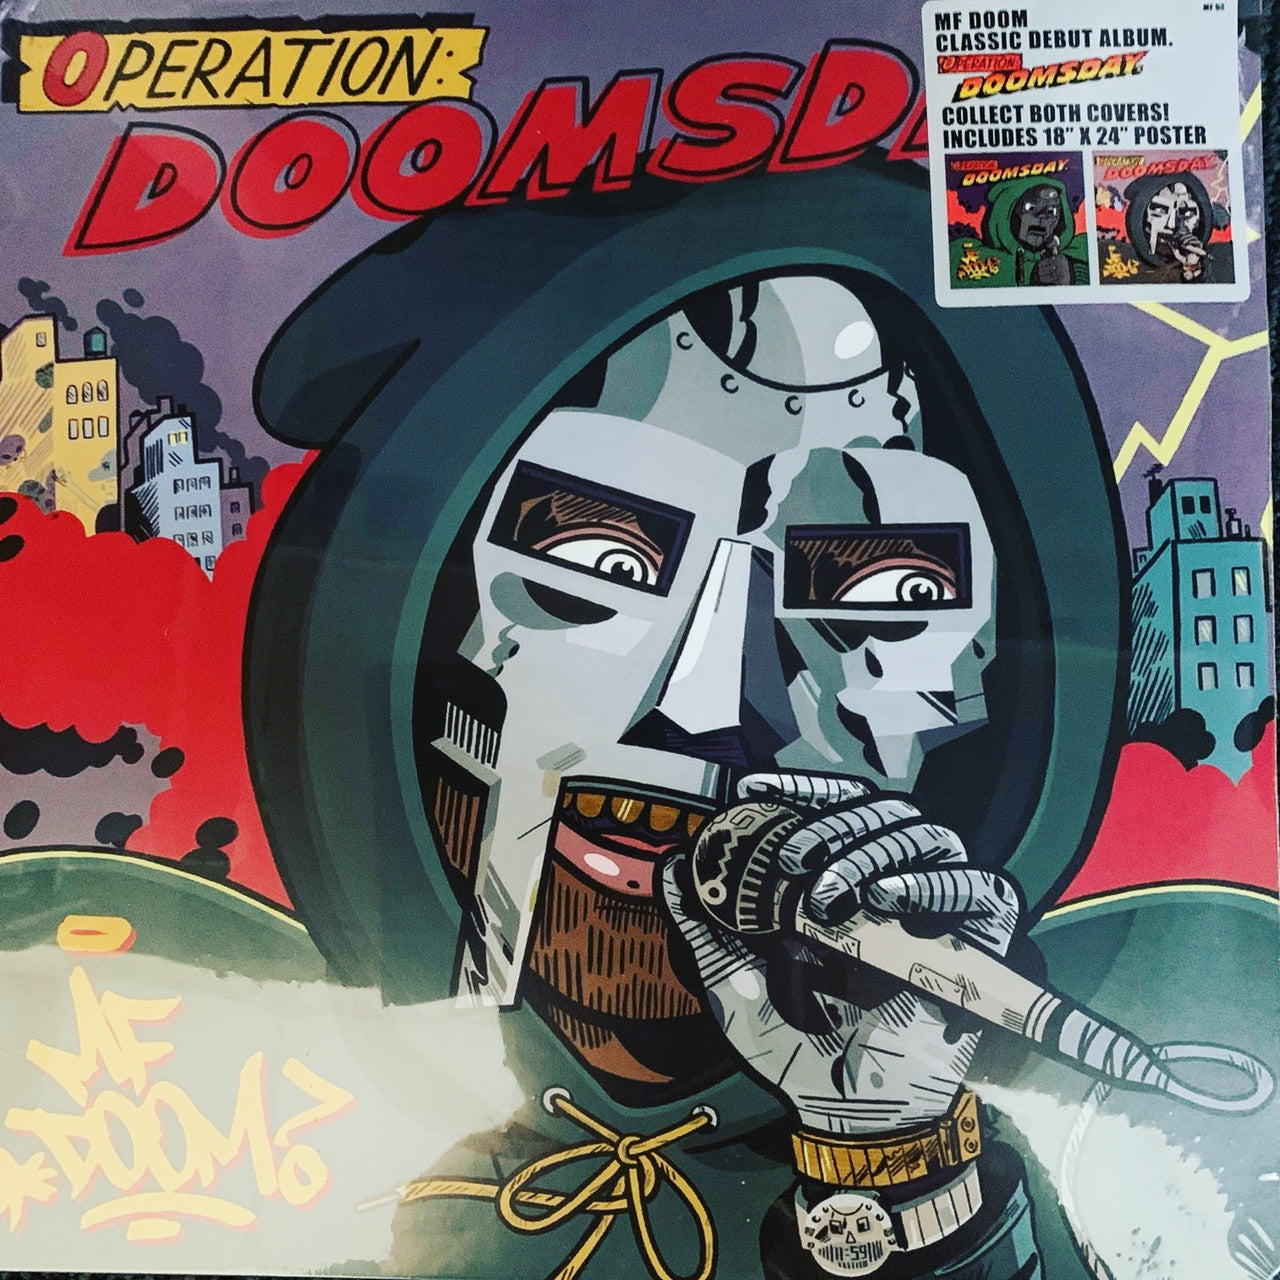 MF DOOM ‘Operation: Doomsday’ 2 X Vinyl Double LP 19 Track Album, Factory Sealed,  Featuring “Doomsday” / “ Red And Gold” / “The Mystery Of Doom” and Loads more